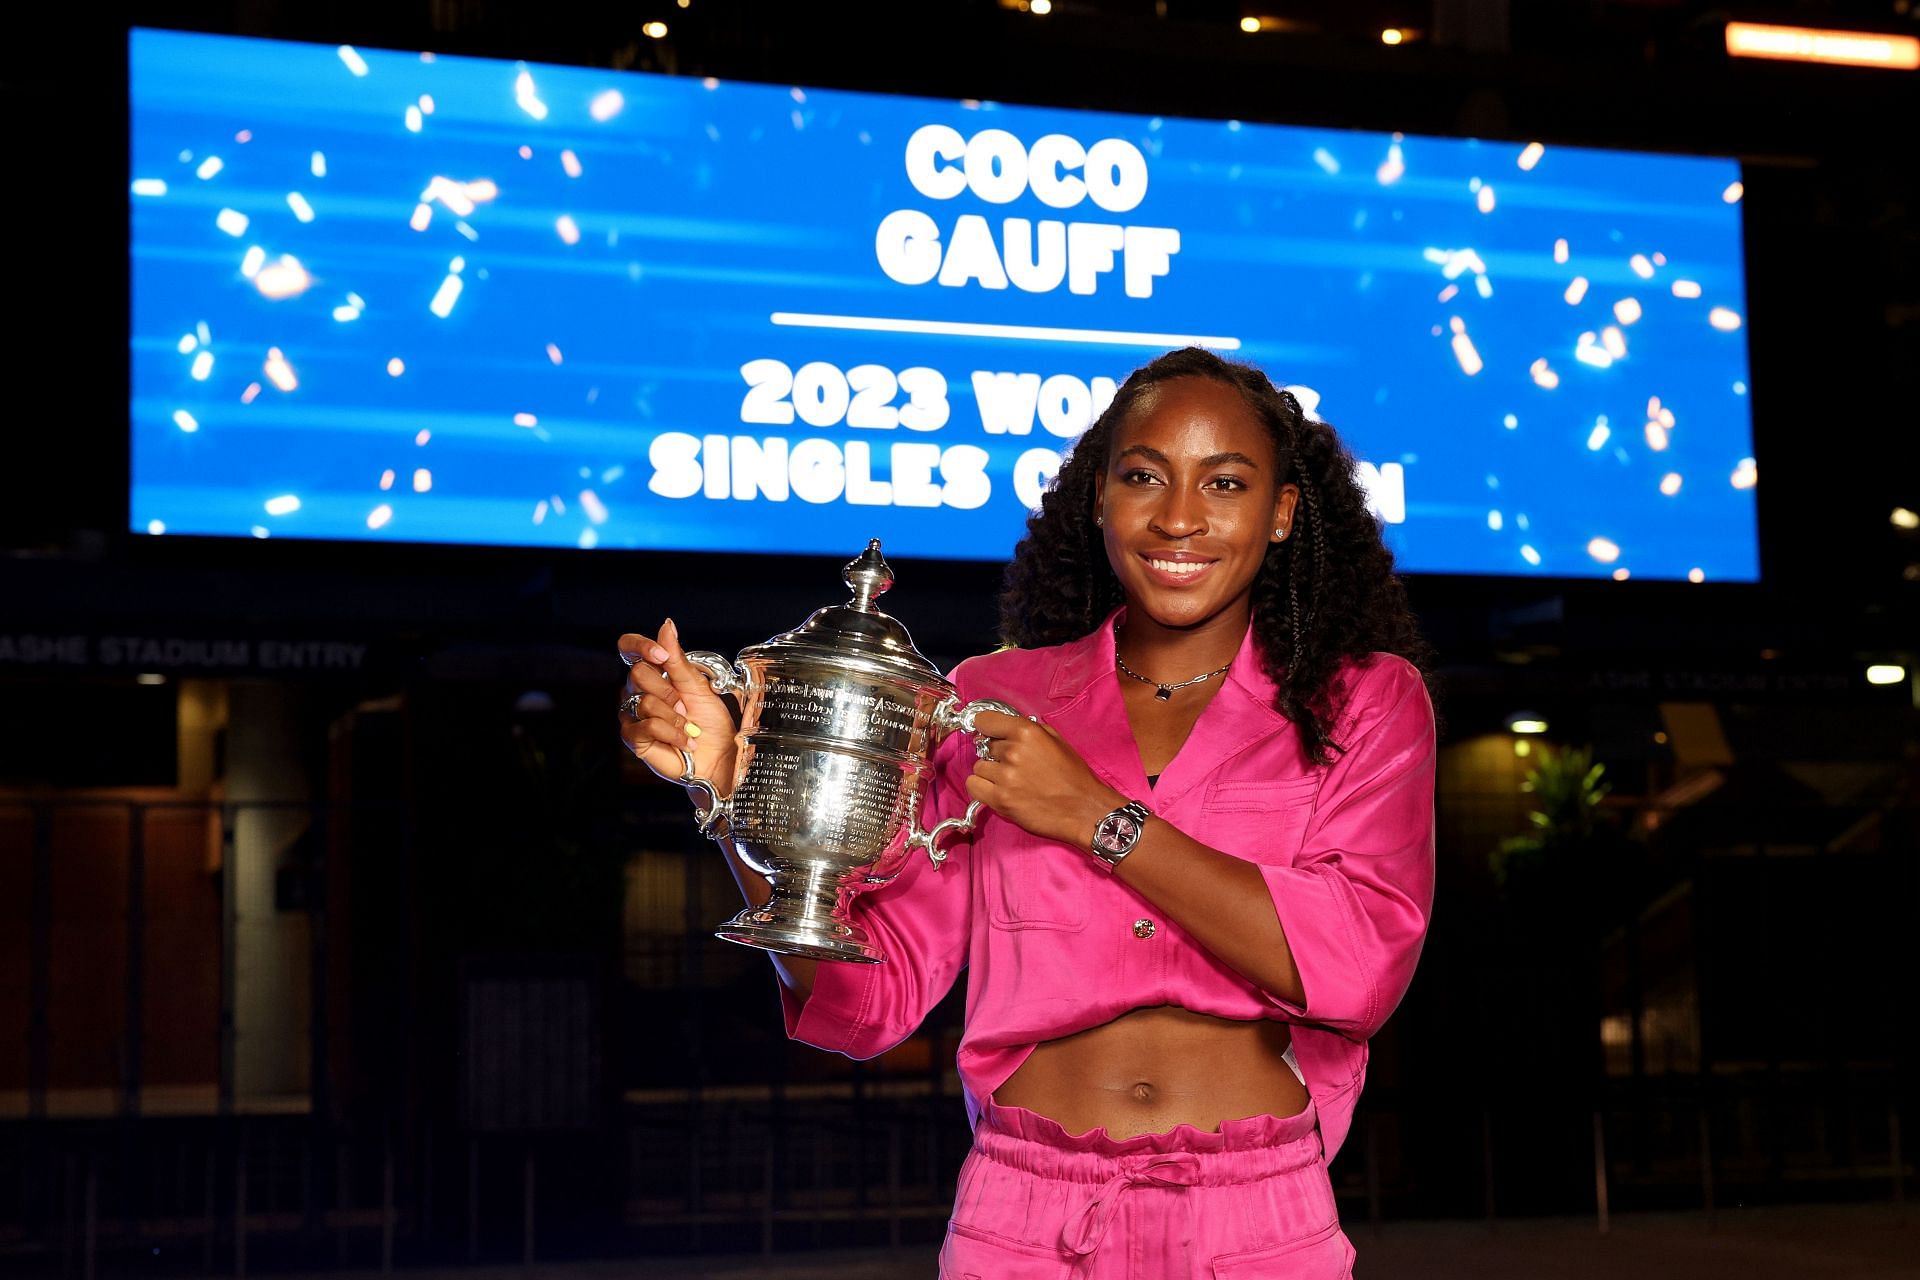 Coco Gauff pictured with the 2023 US Open trophy